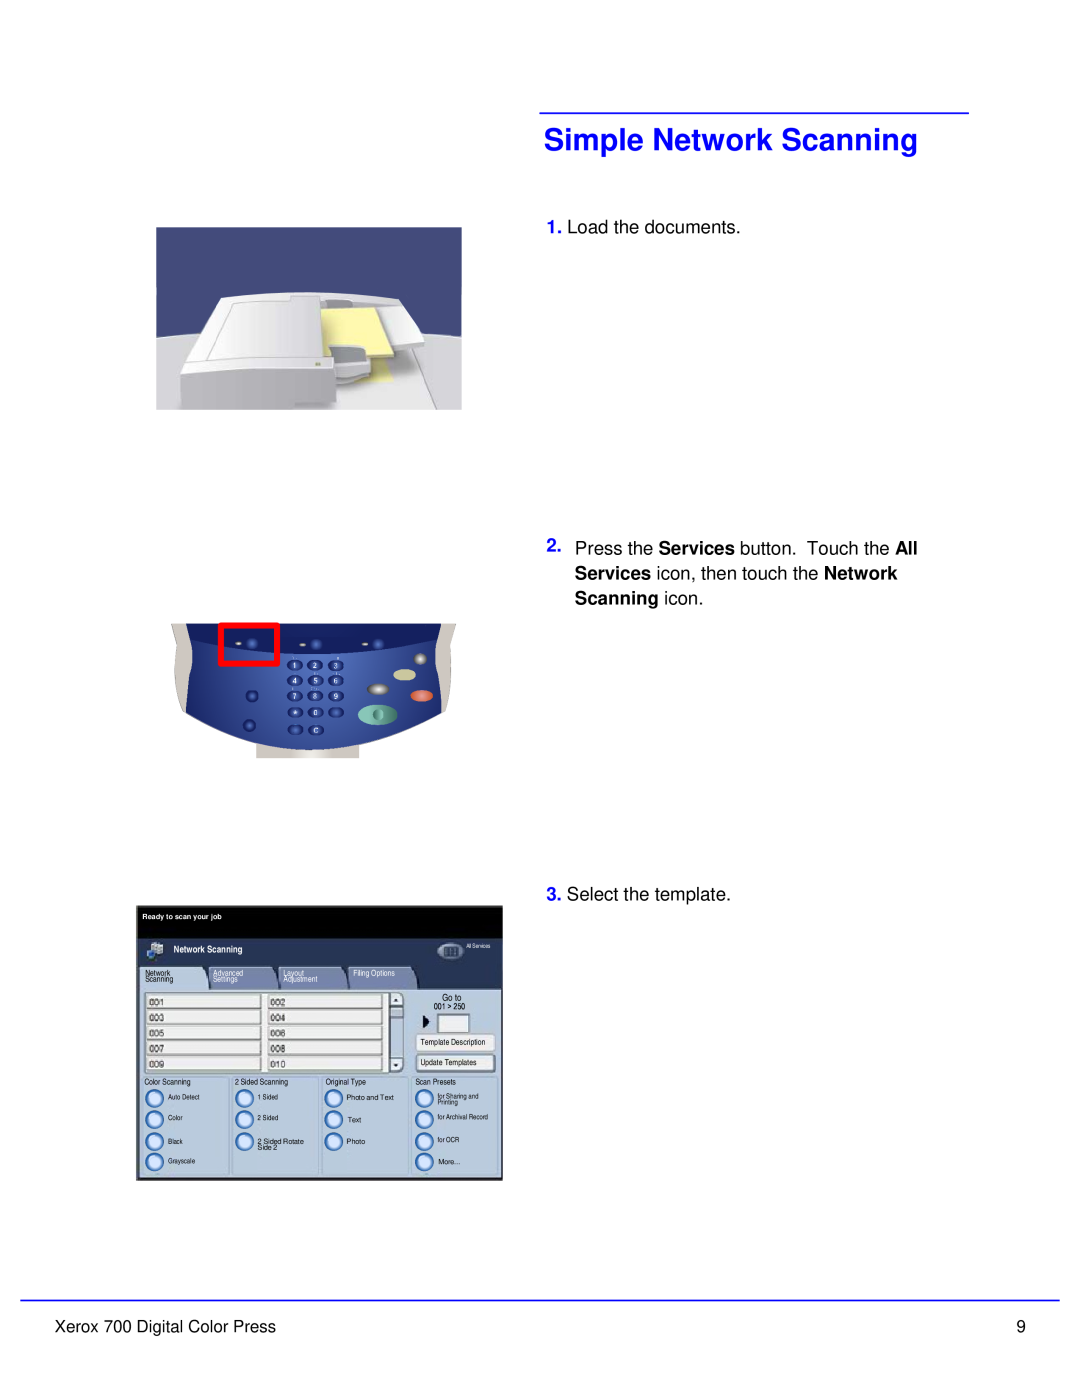 Xerox 700 Simple Network Scanning, Load the documents, Select the template, Go to, Advanced, Layout, Settings, Adjustment 